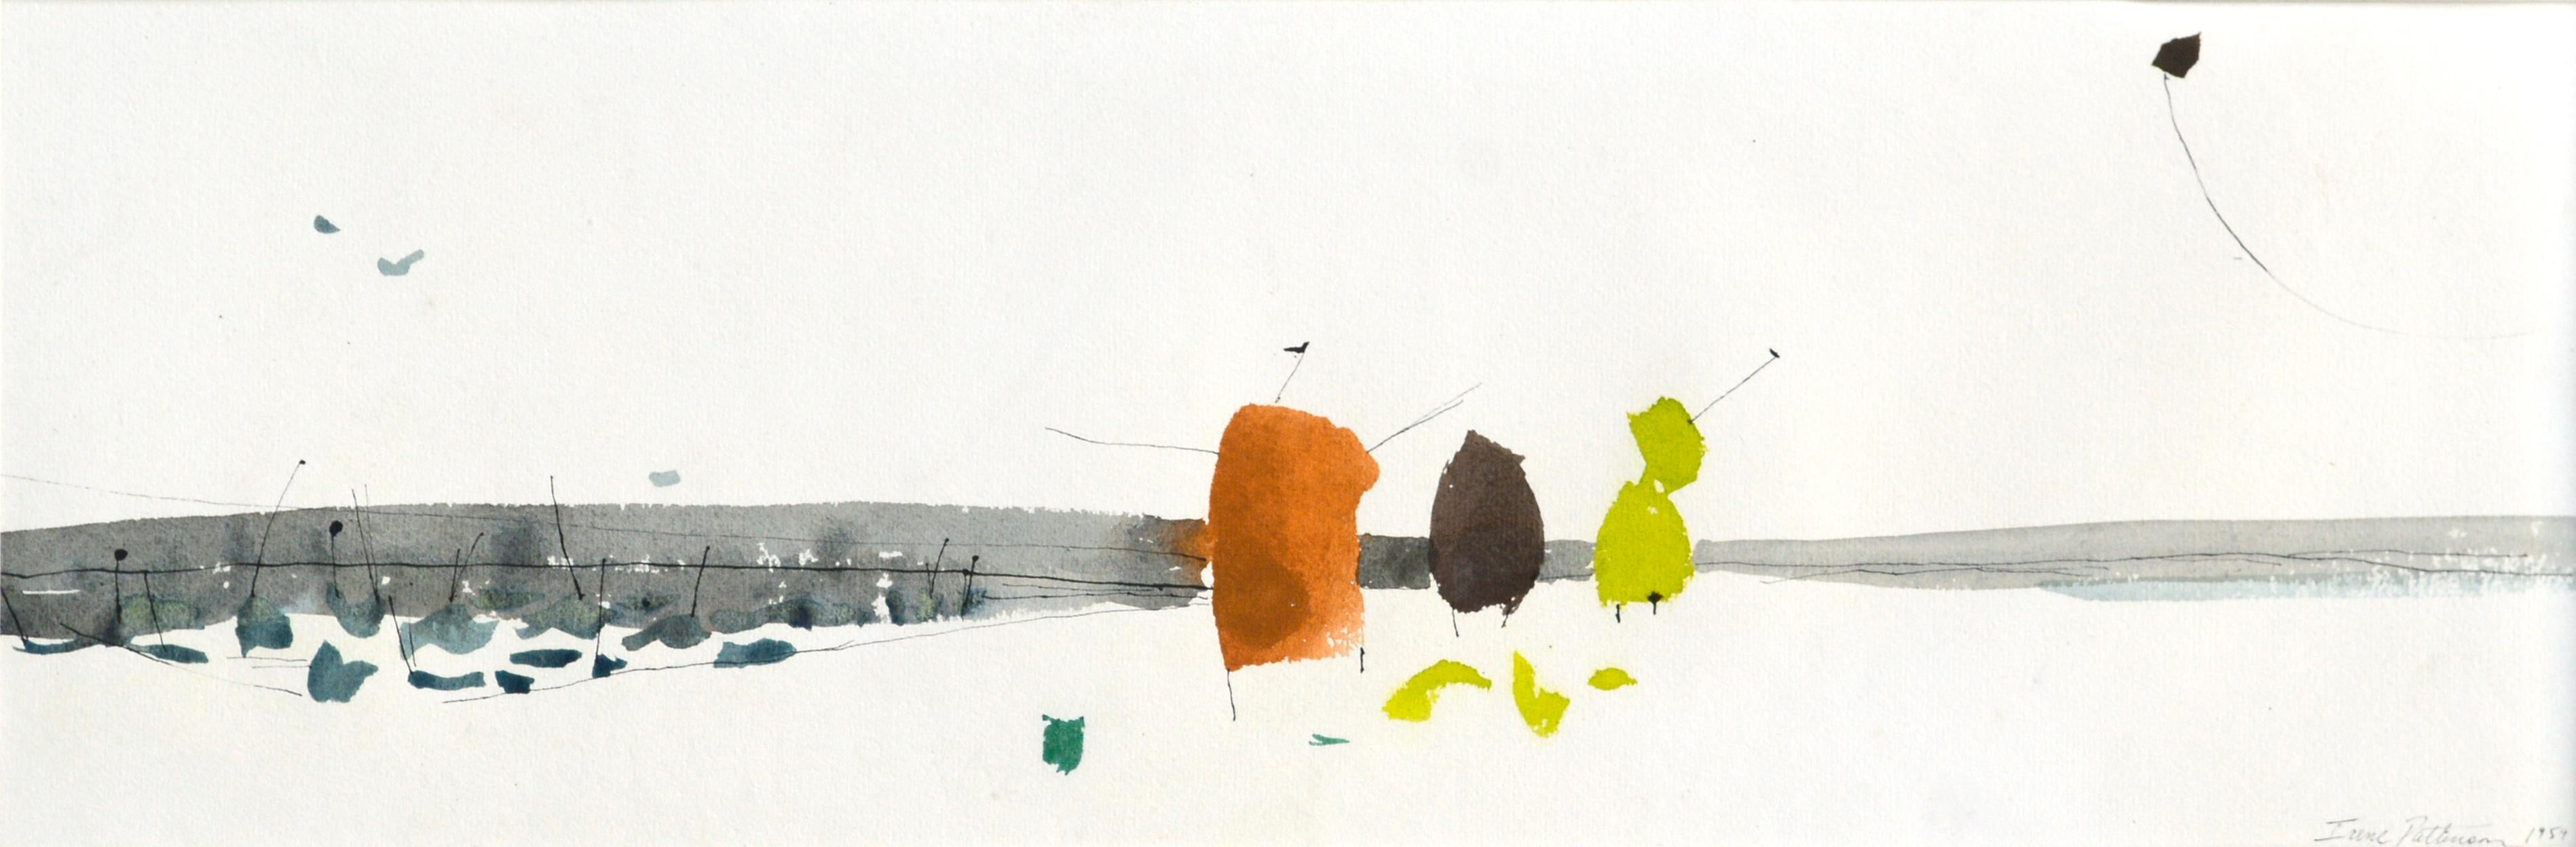 Mid Century Abstracted Landscape -- Flying A Kite at the Beach - Painting by Irene Pattinson